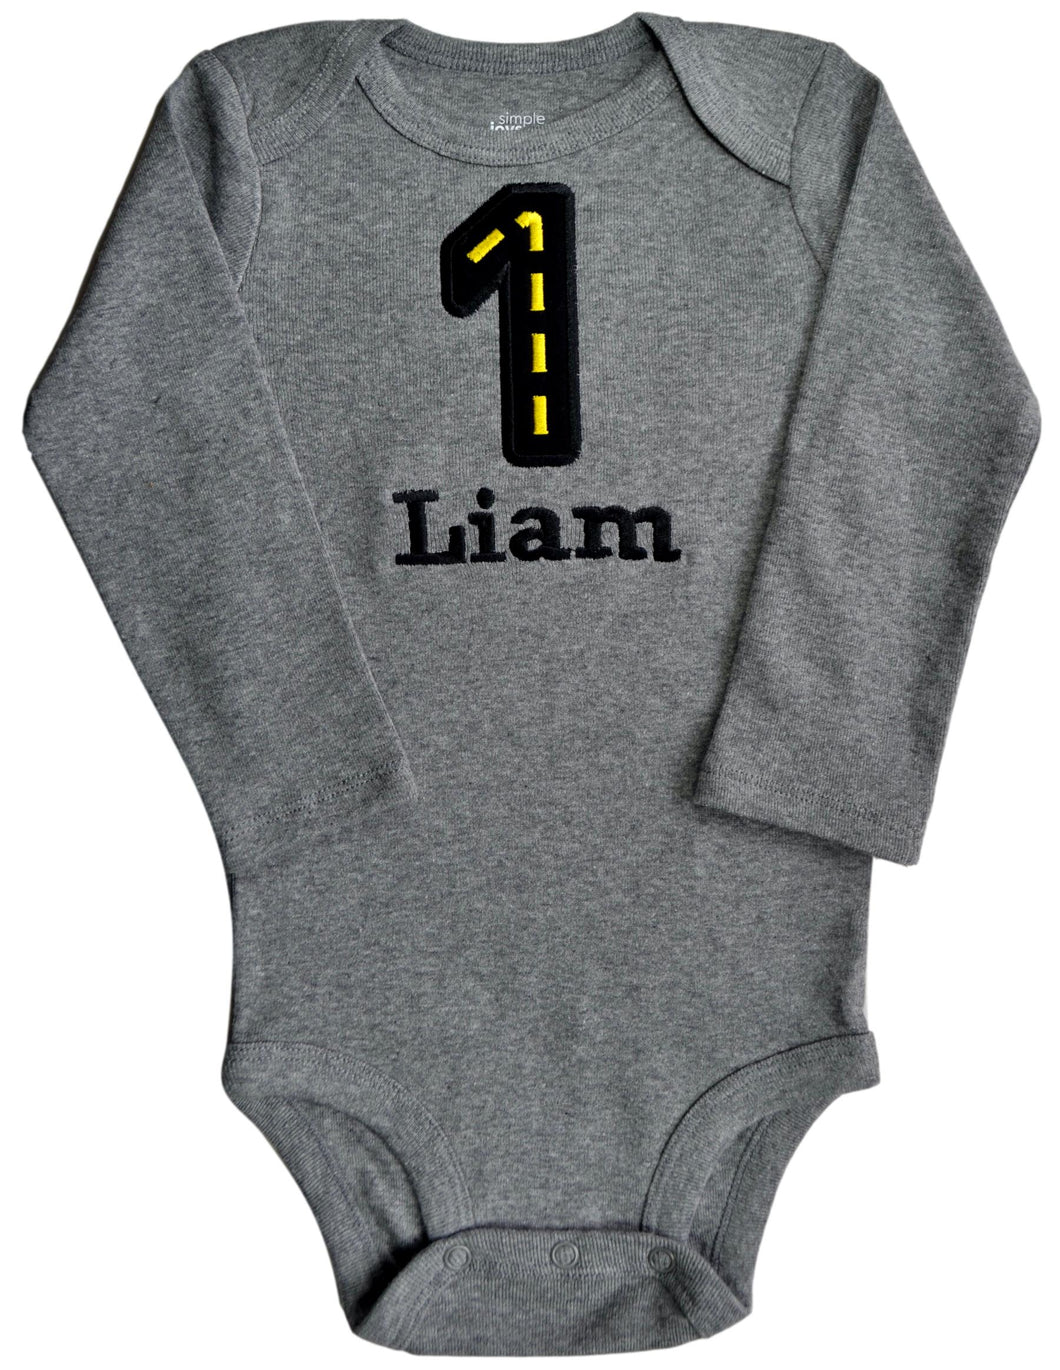 Embroidered First Birthday Year 1 Race Track Bodysuit for Baby Boys with Your Custom Name